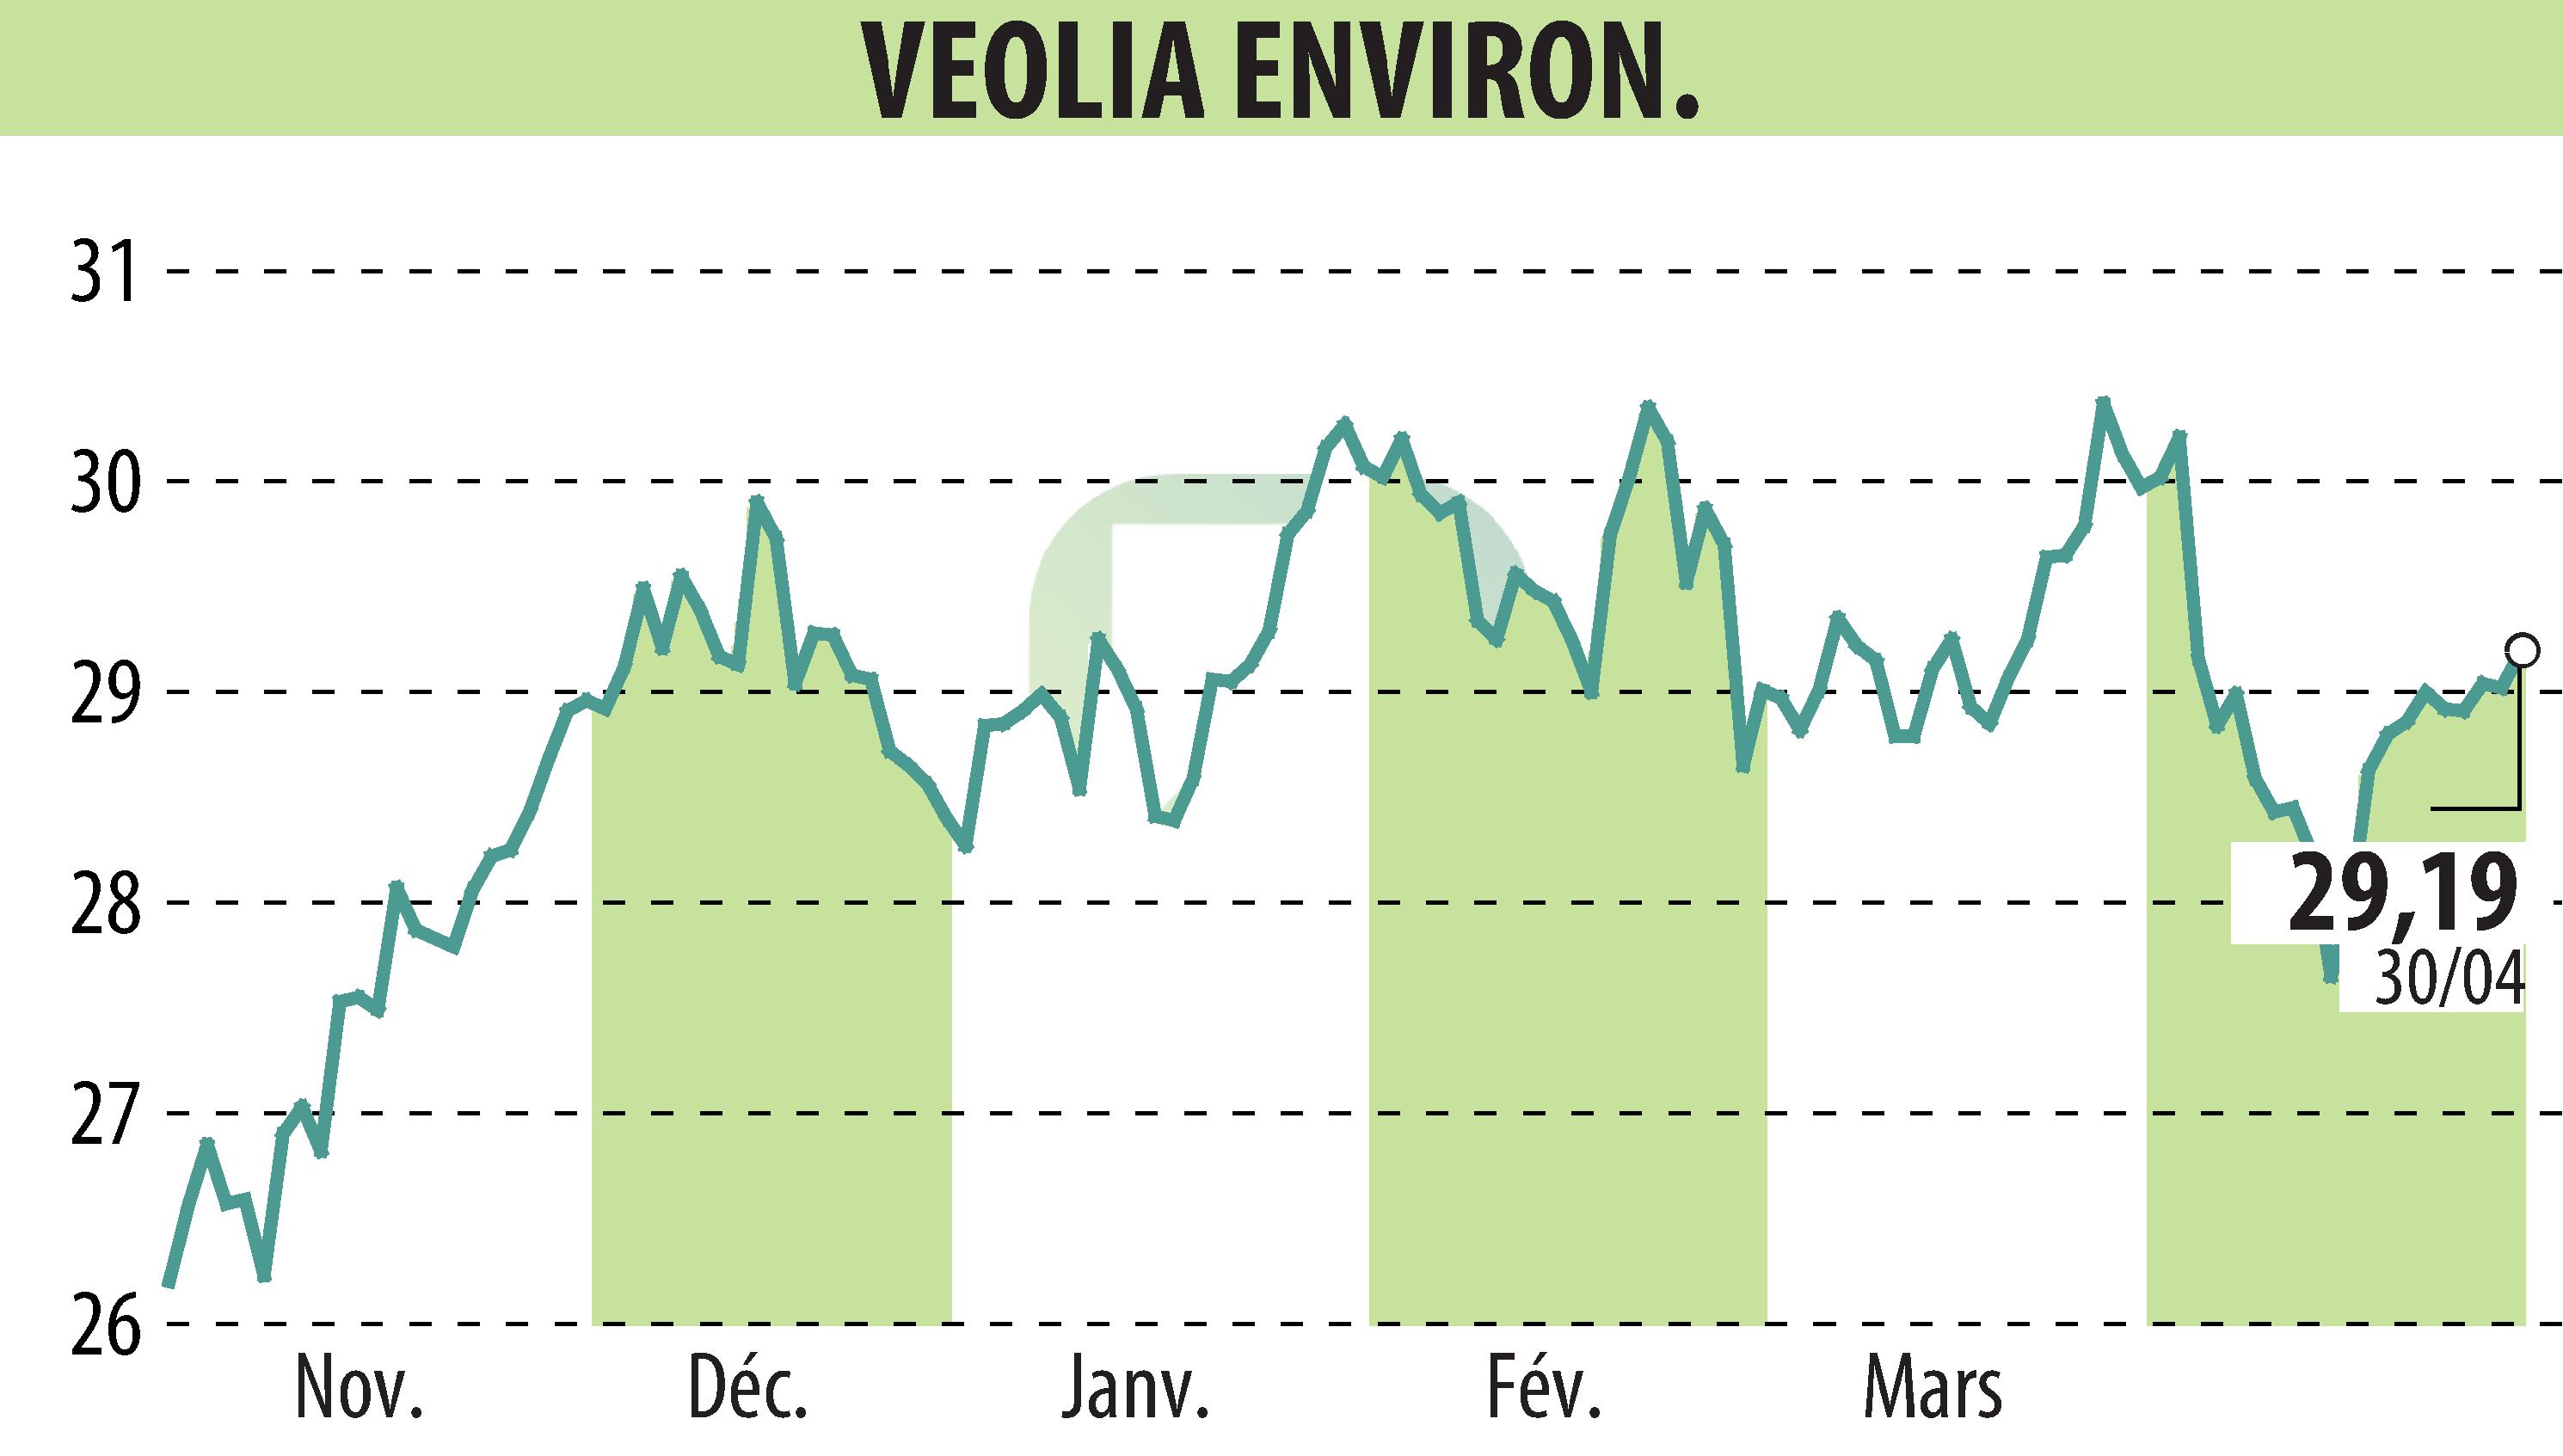 Stock price chart of VEOLIA (EPA:VIE) showing fluctuations.